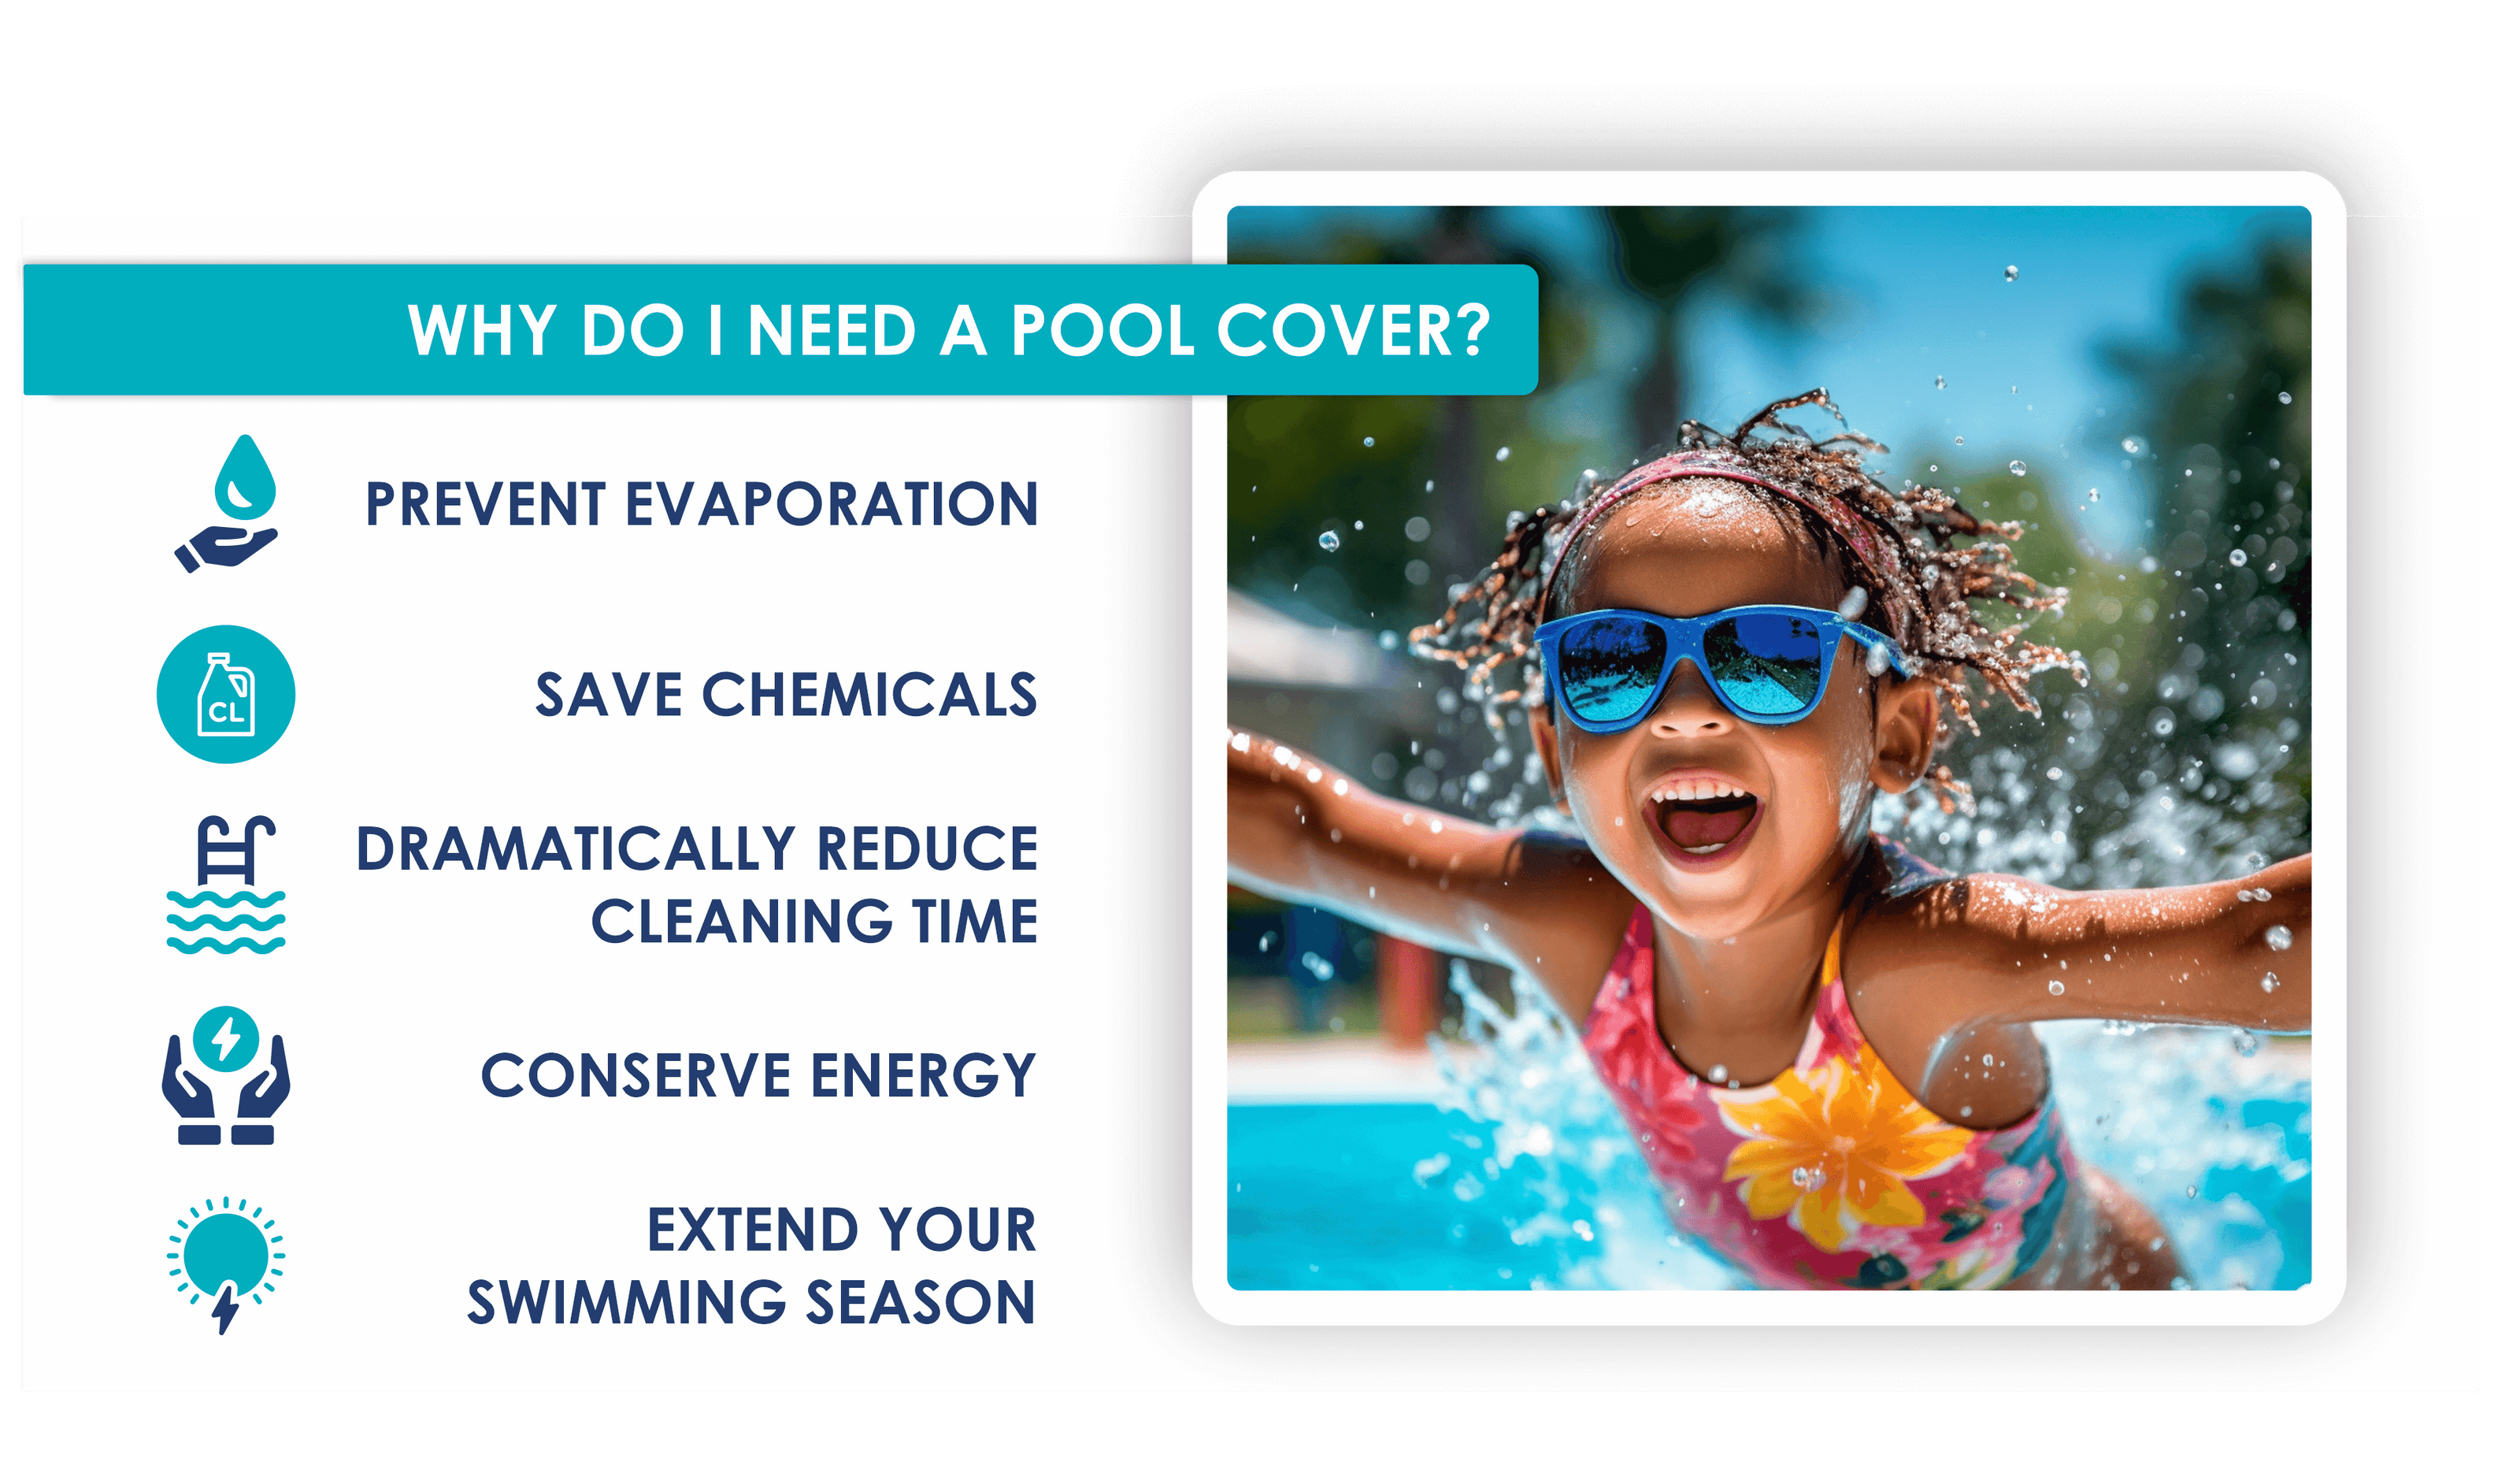 why do I need a pool cover - prevent evaporation, save chemicals, conserve energy